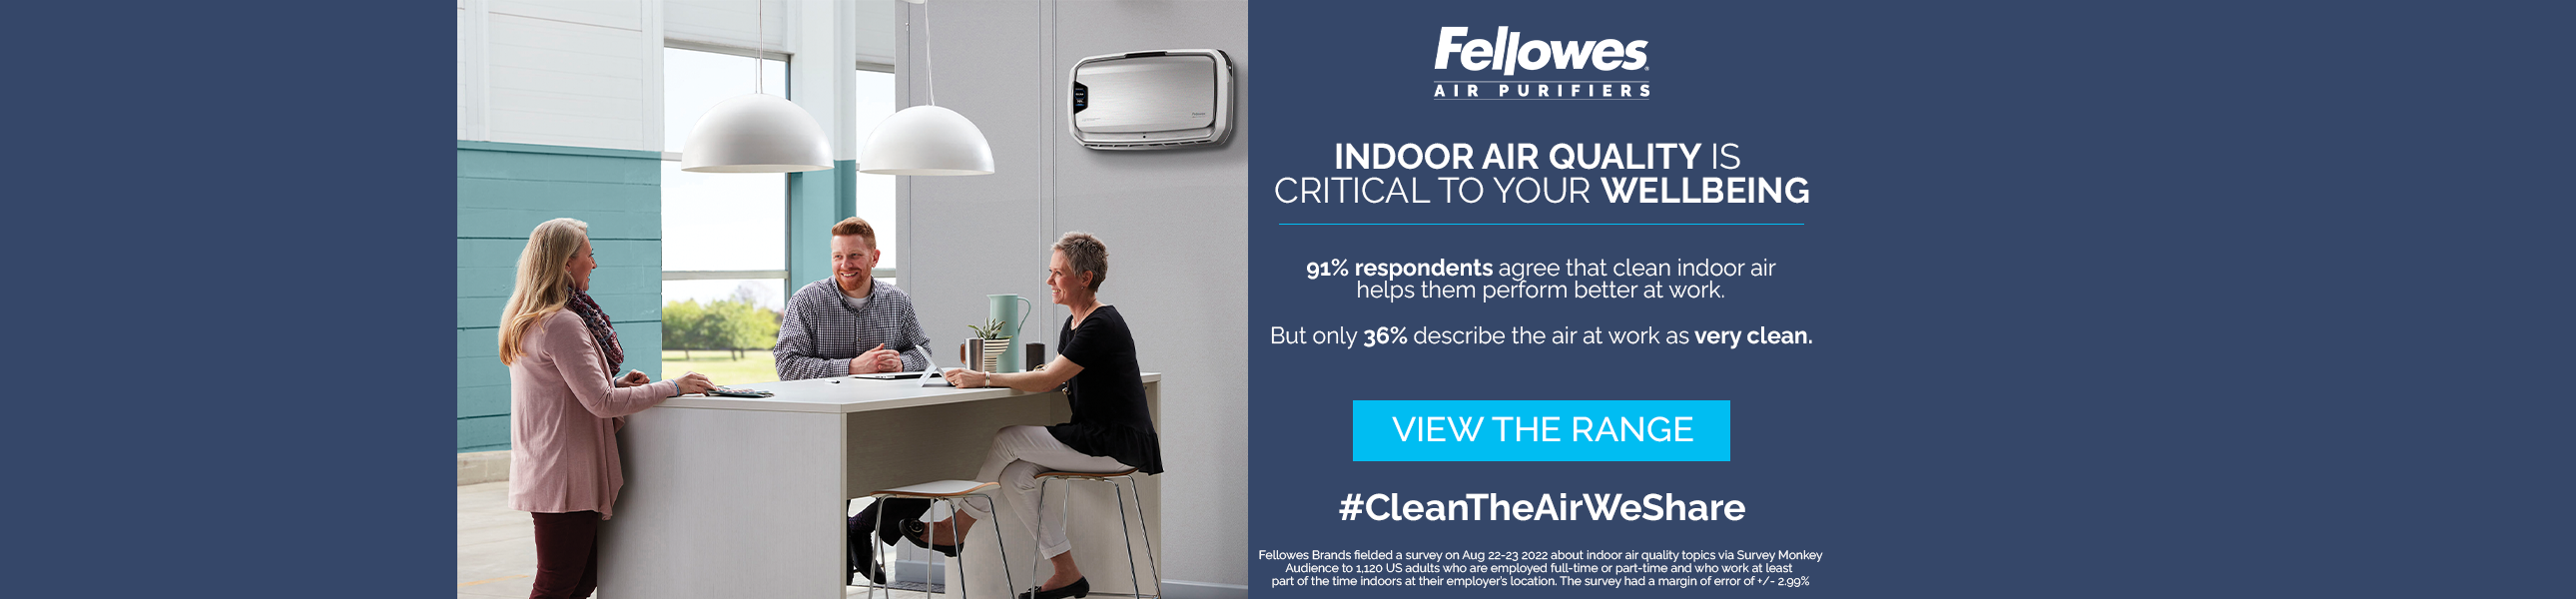 Indoor Air Quality is Critical to Your Wellbeing